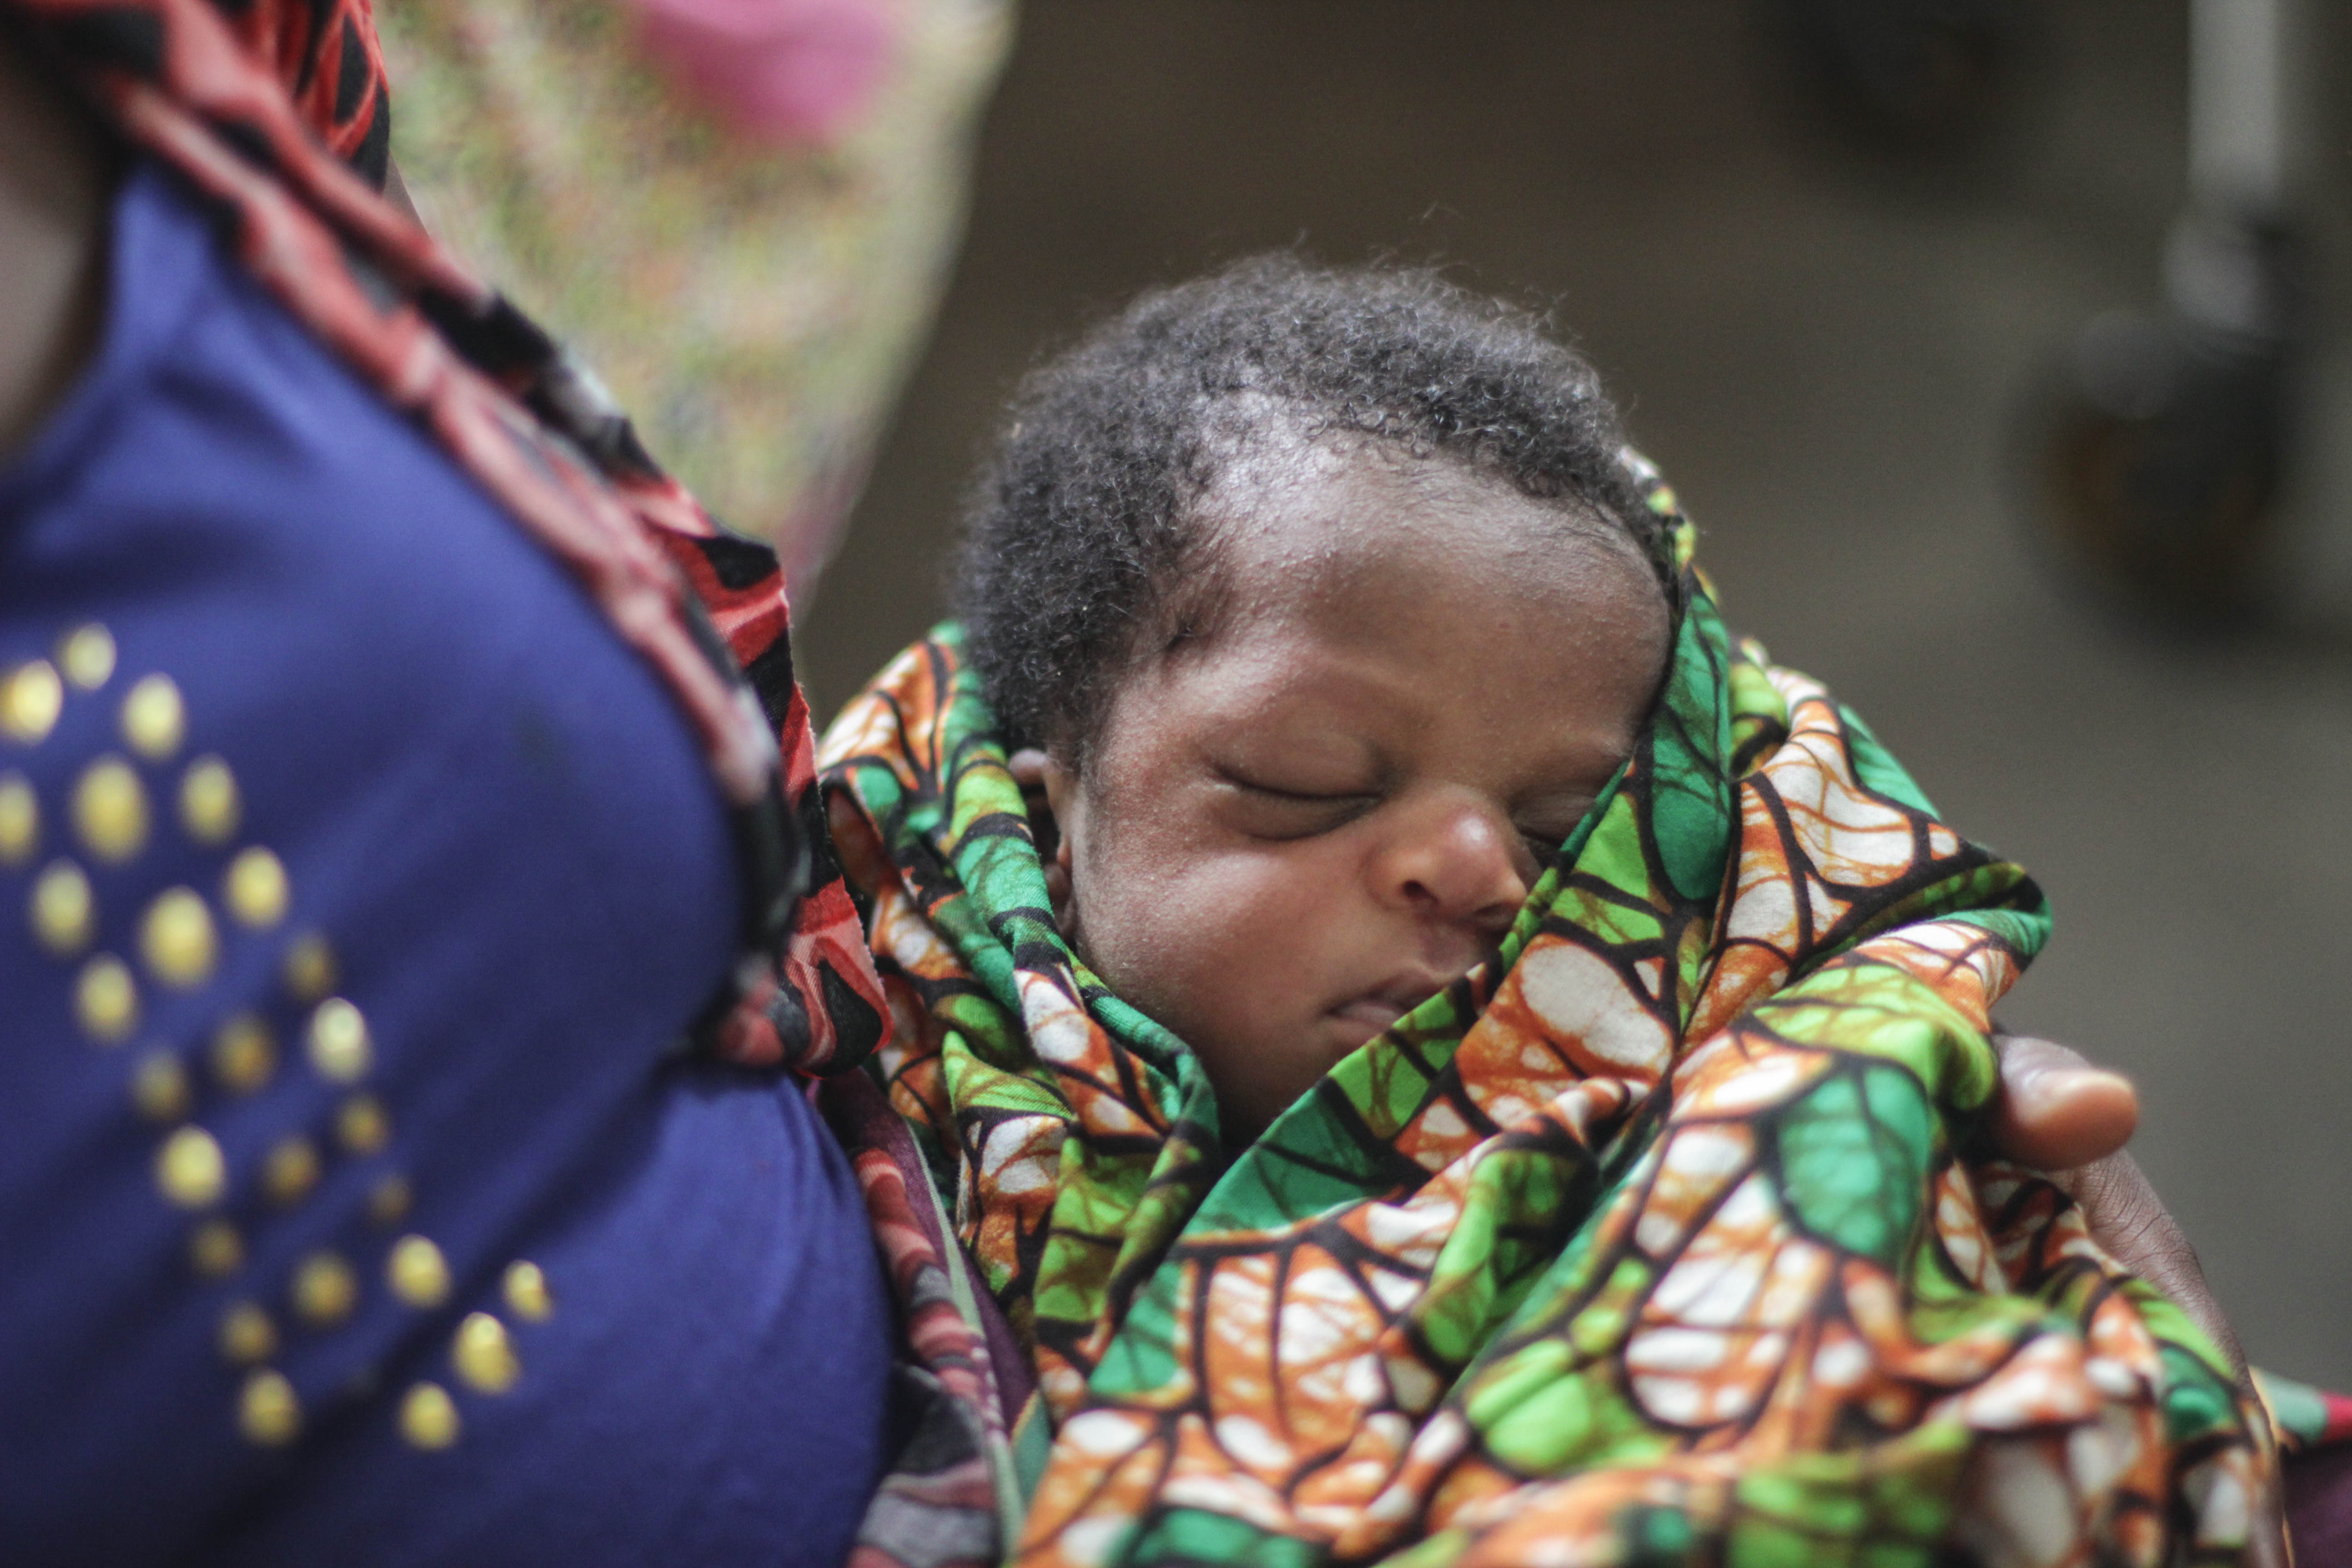 Mother and newborn baby in Malawi